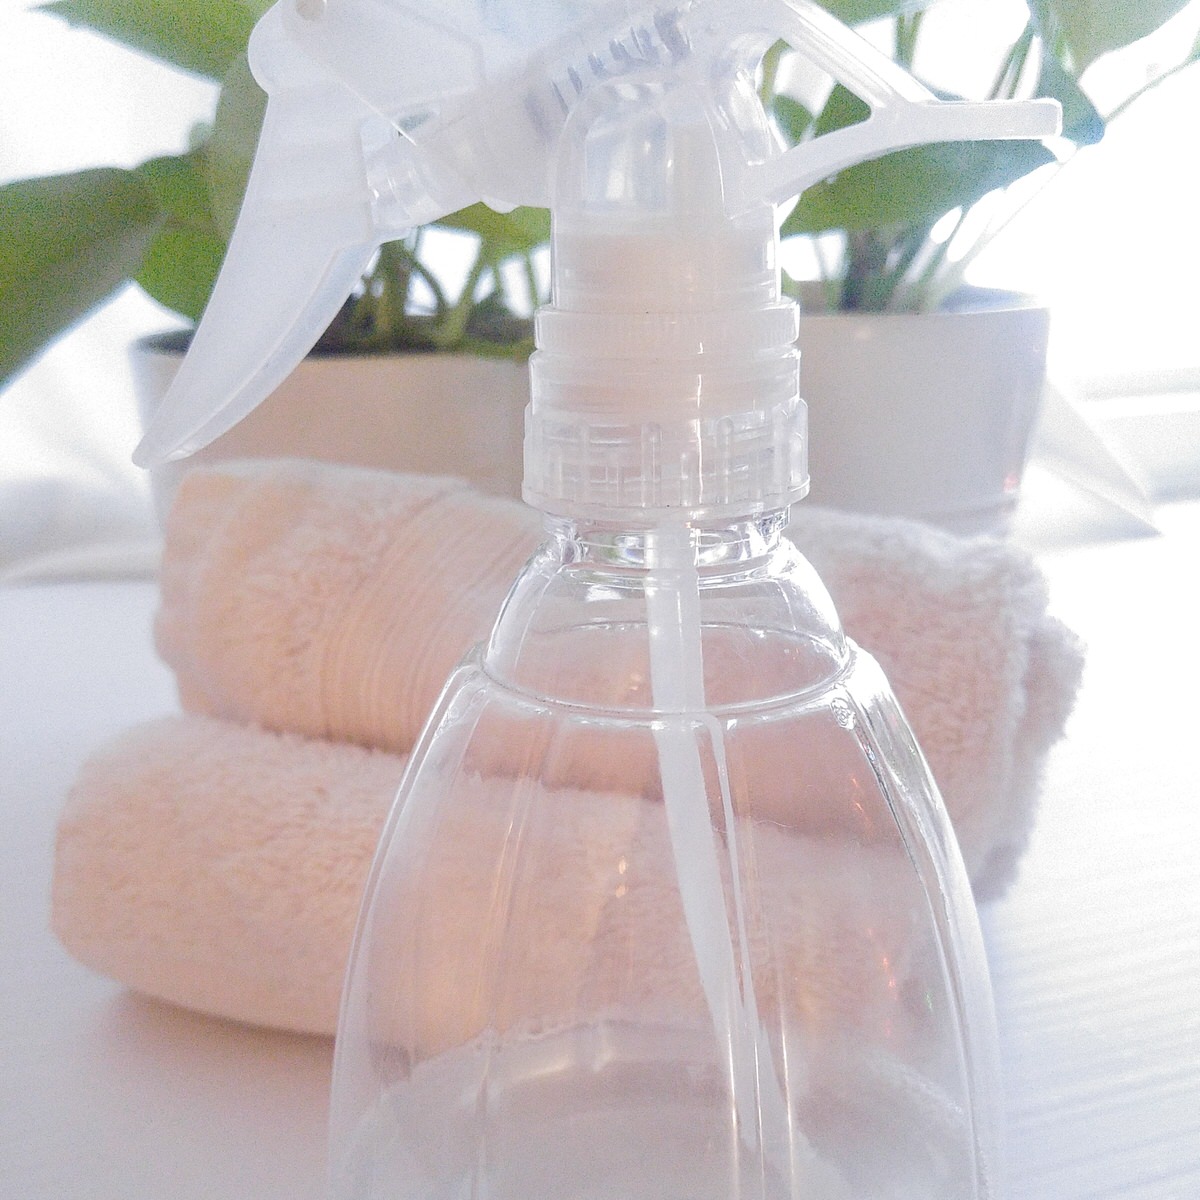 clear spray bottle with clear stain remover in it in front of some rolled hand towels and a green plant